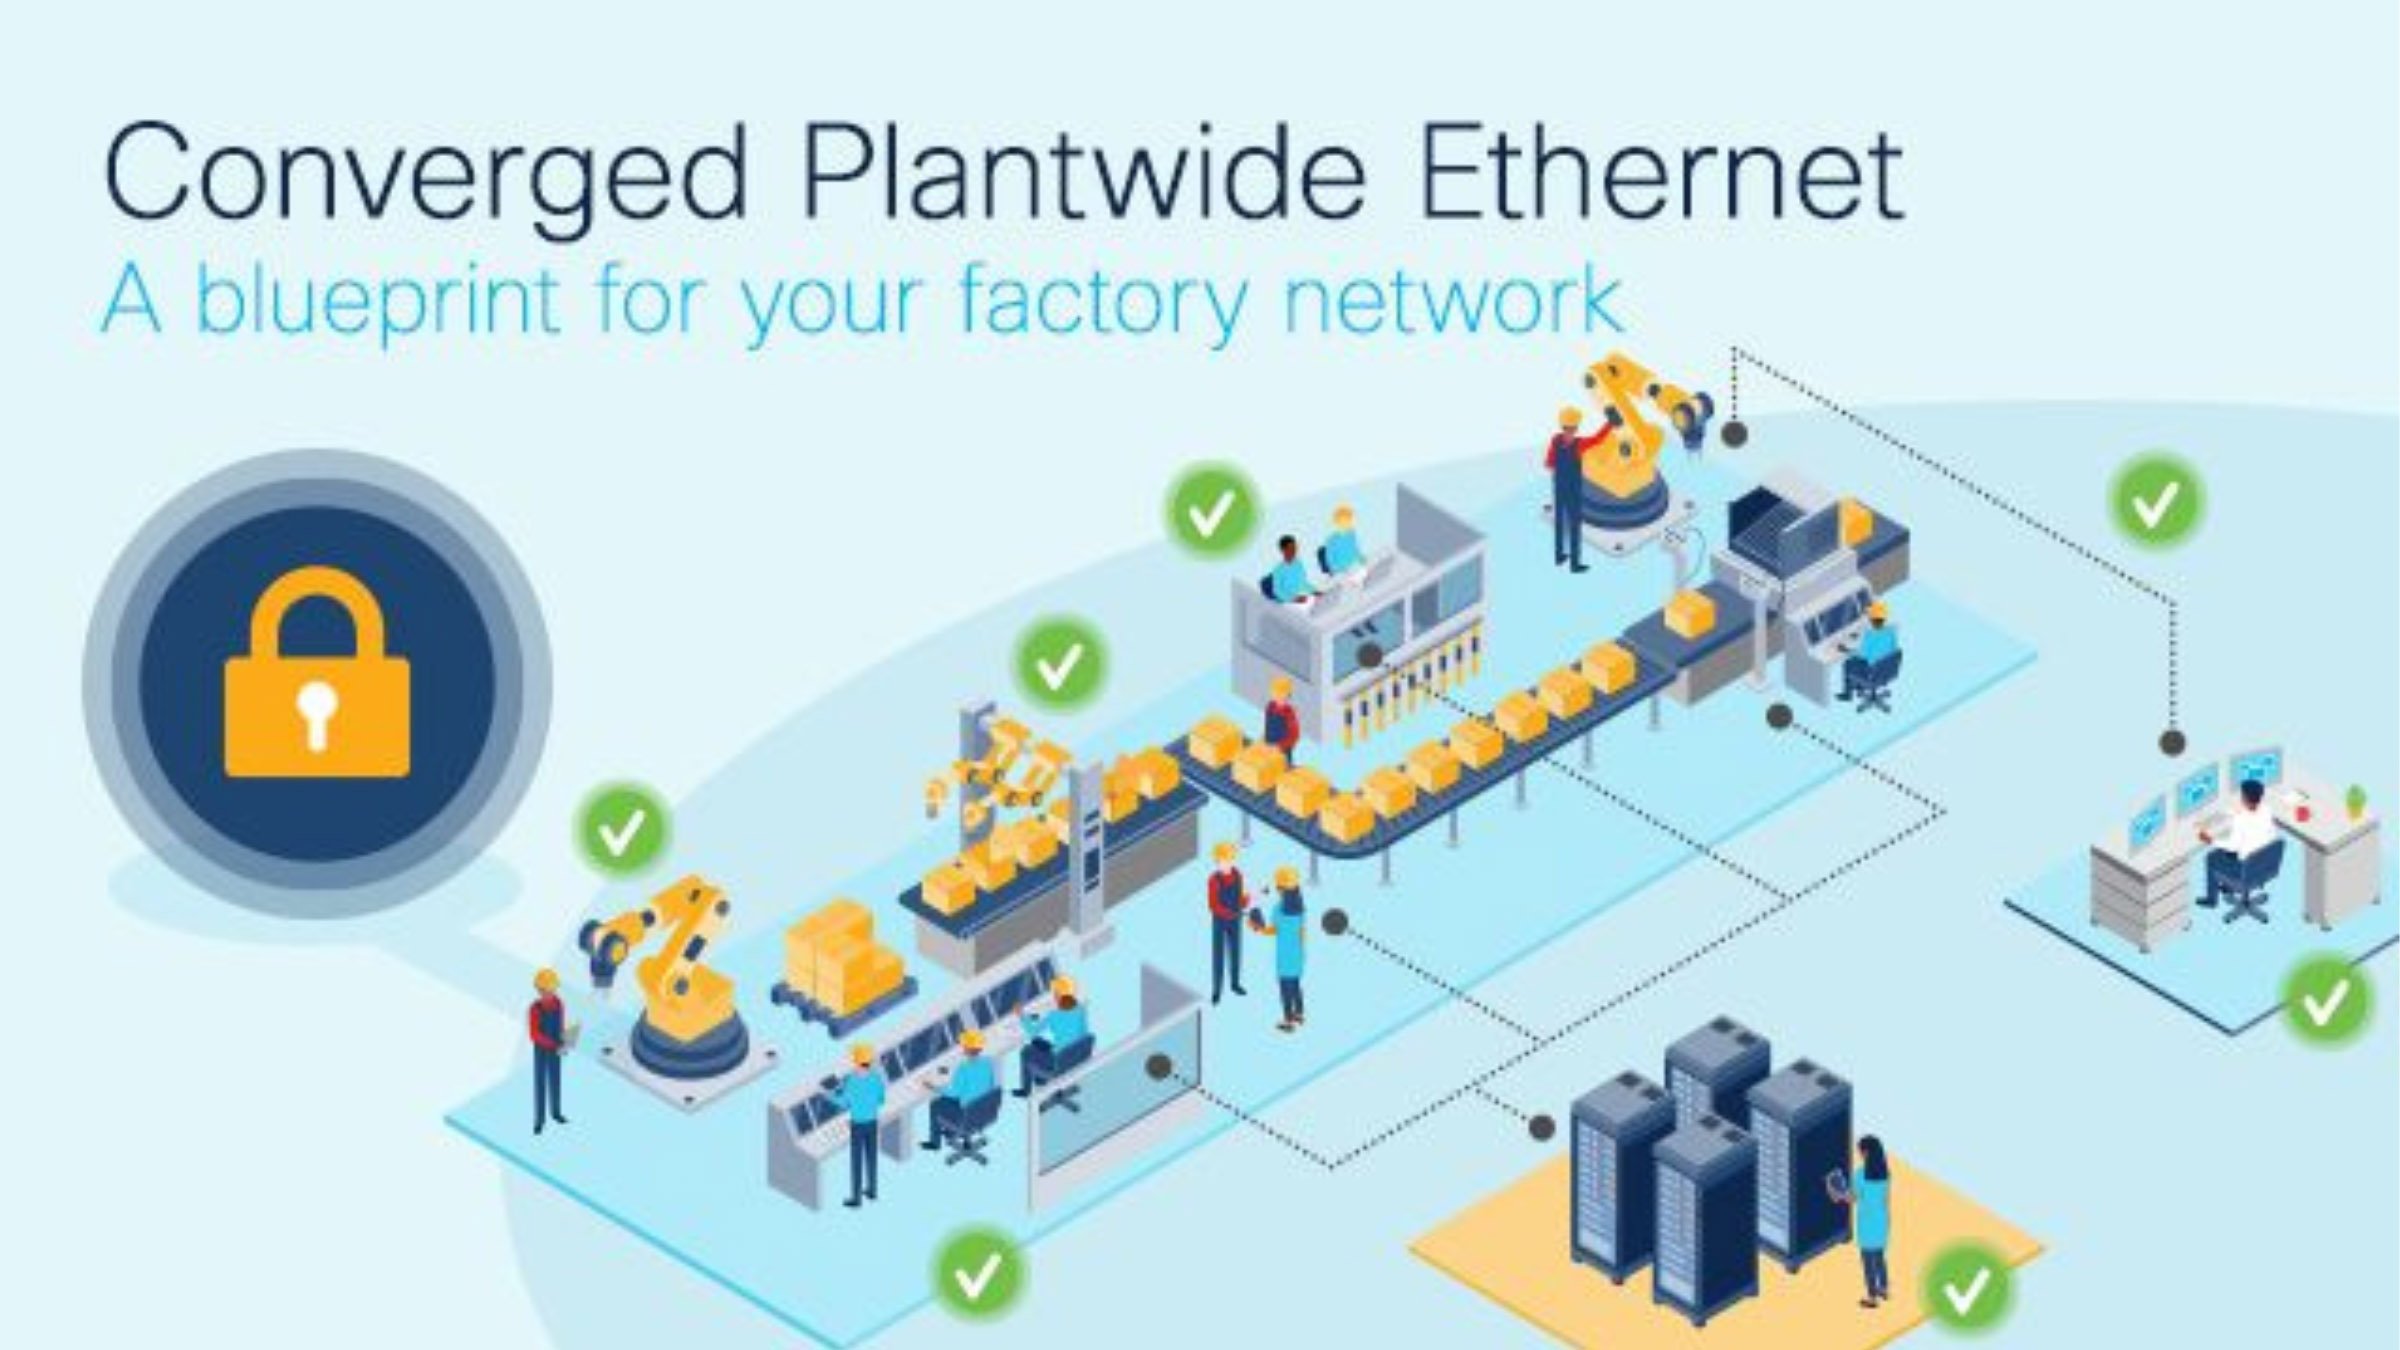 A Converged Plantwide Ethernet blueprint animation diagram displaying the processes, people and connections for a factory network 